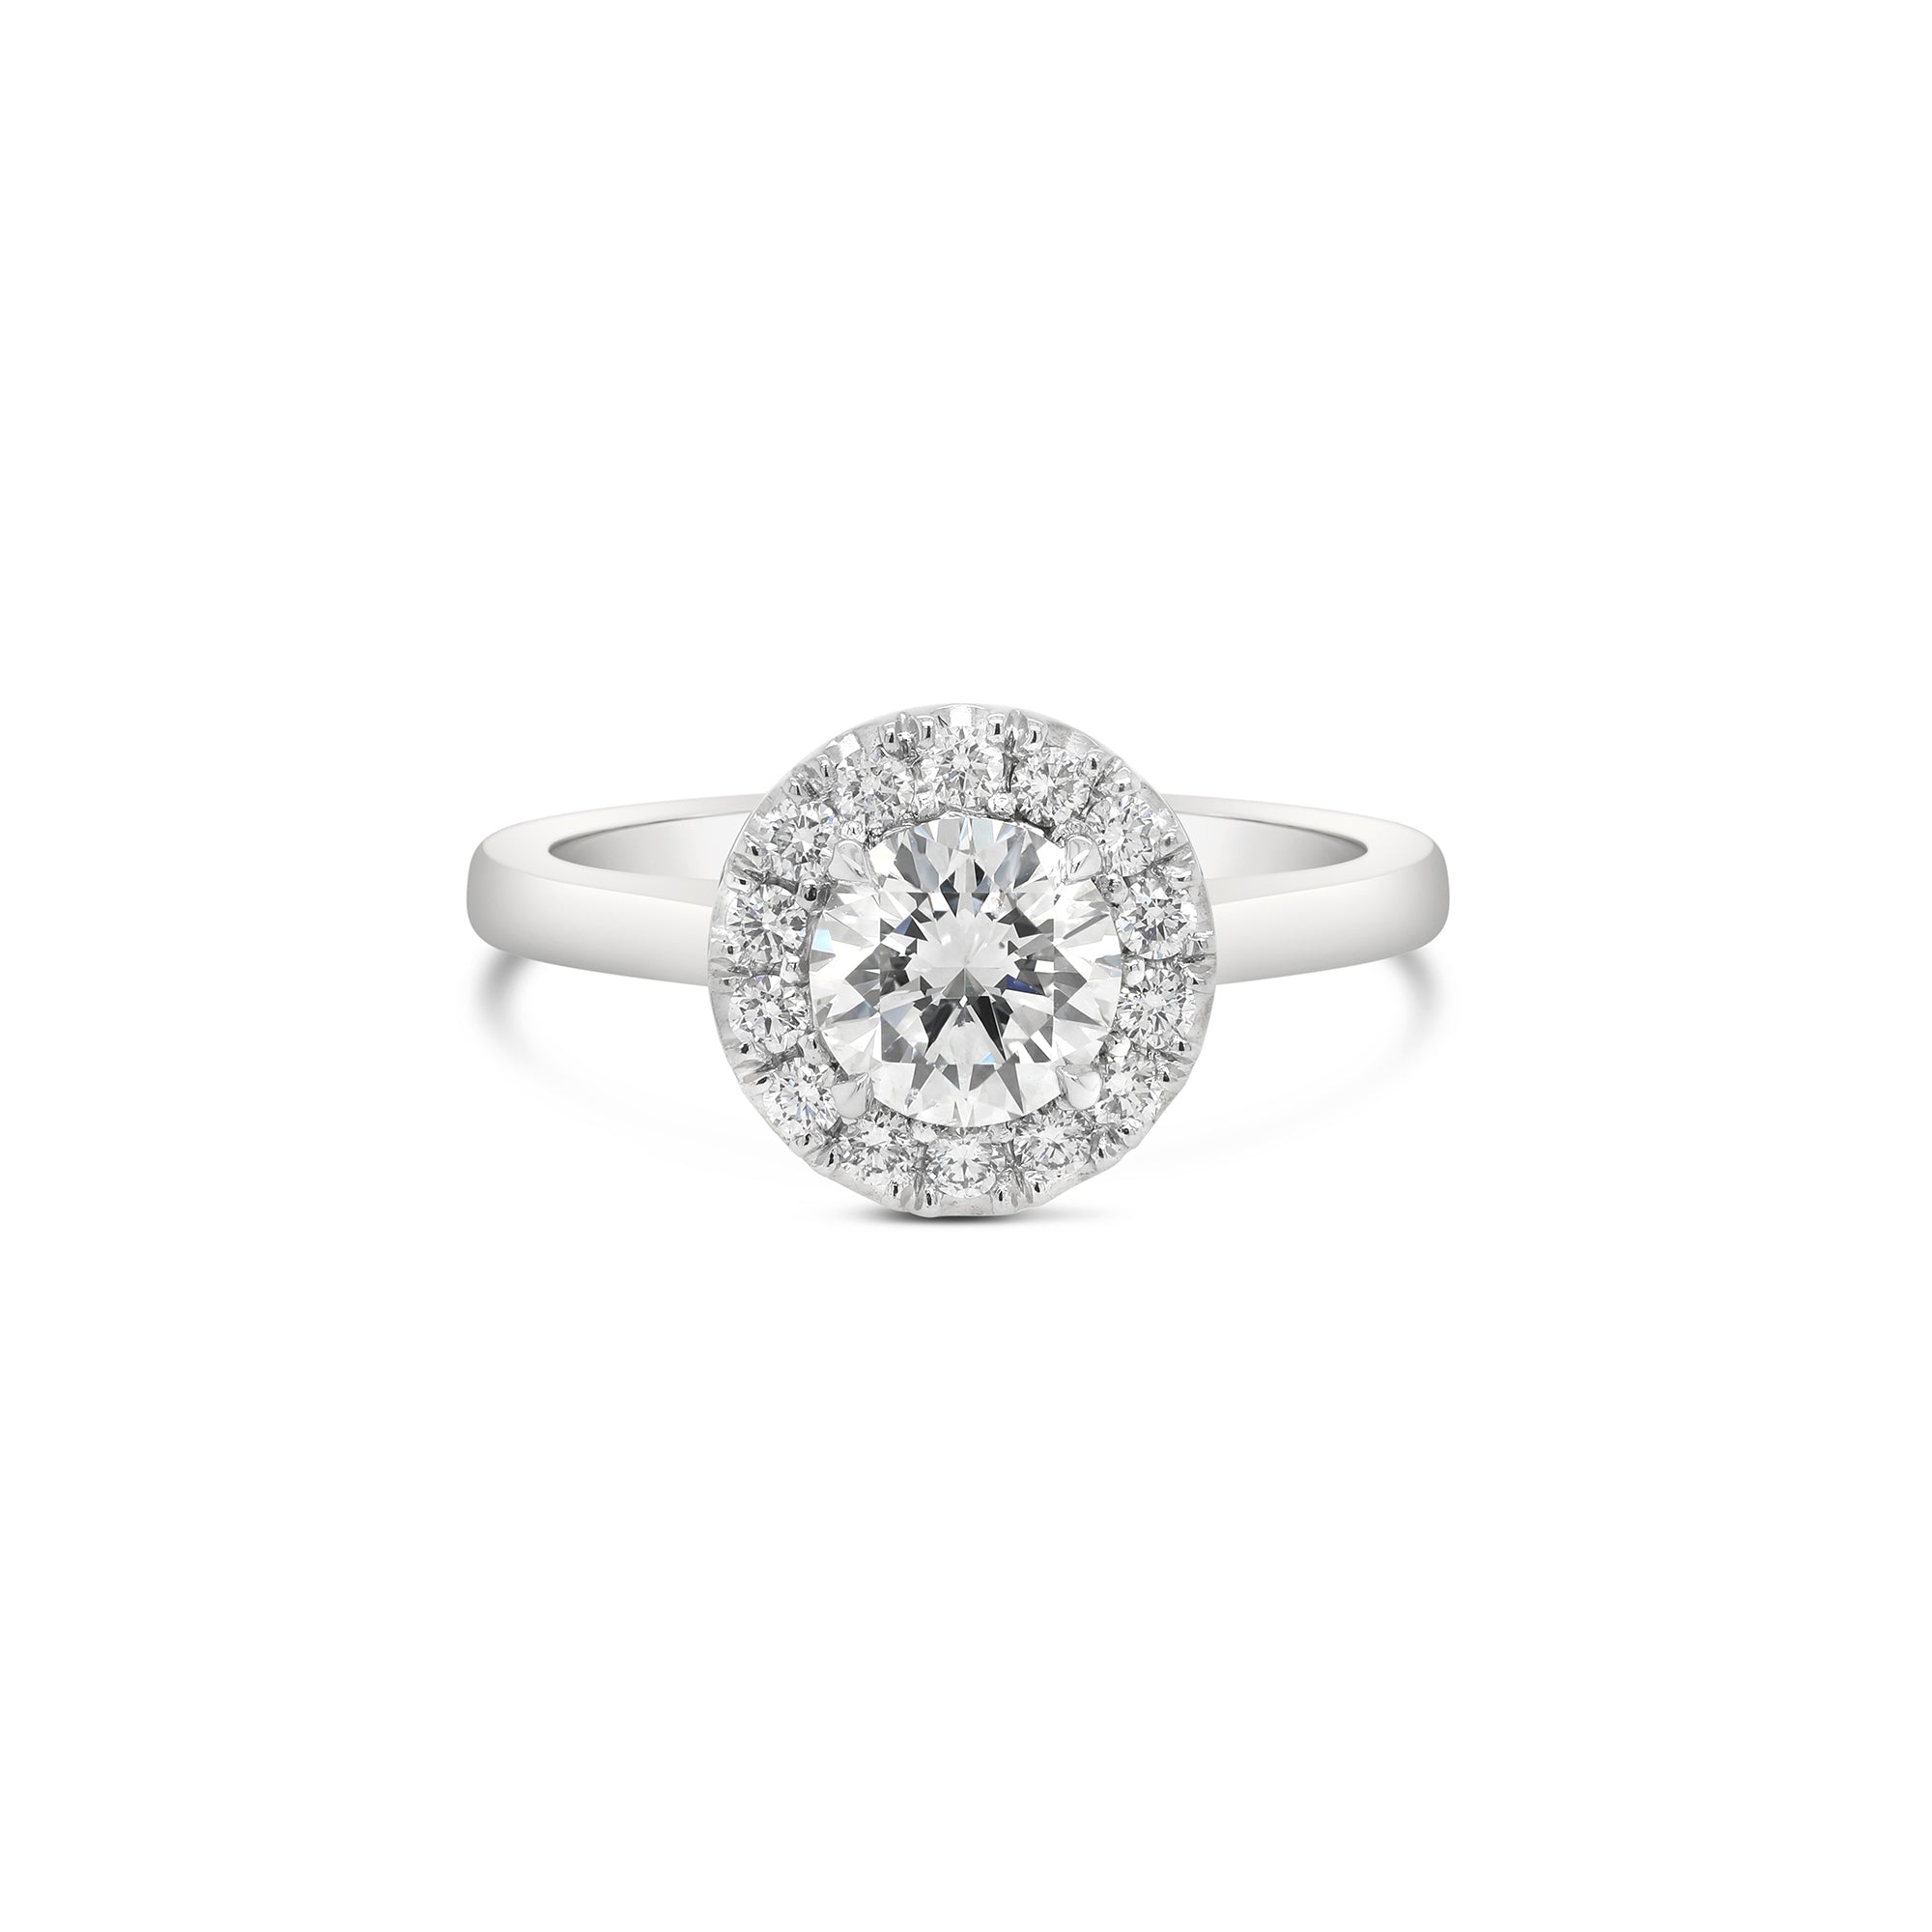 1ct Round Brilliant Cut Halo Engagement Ring White Gold